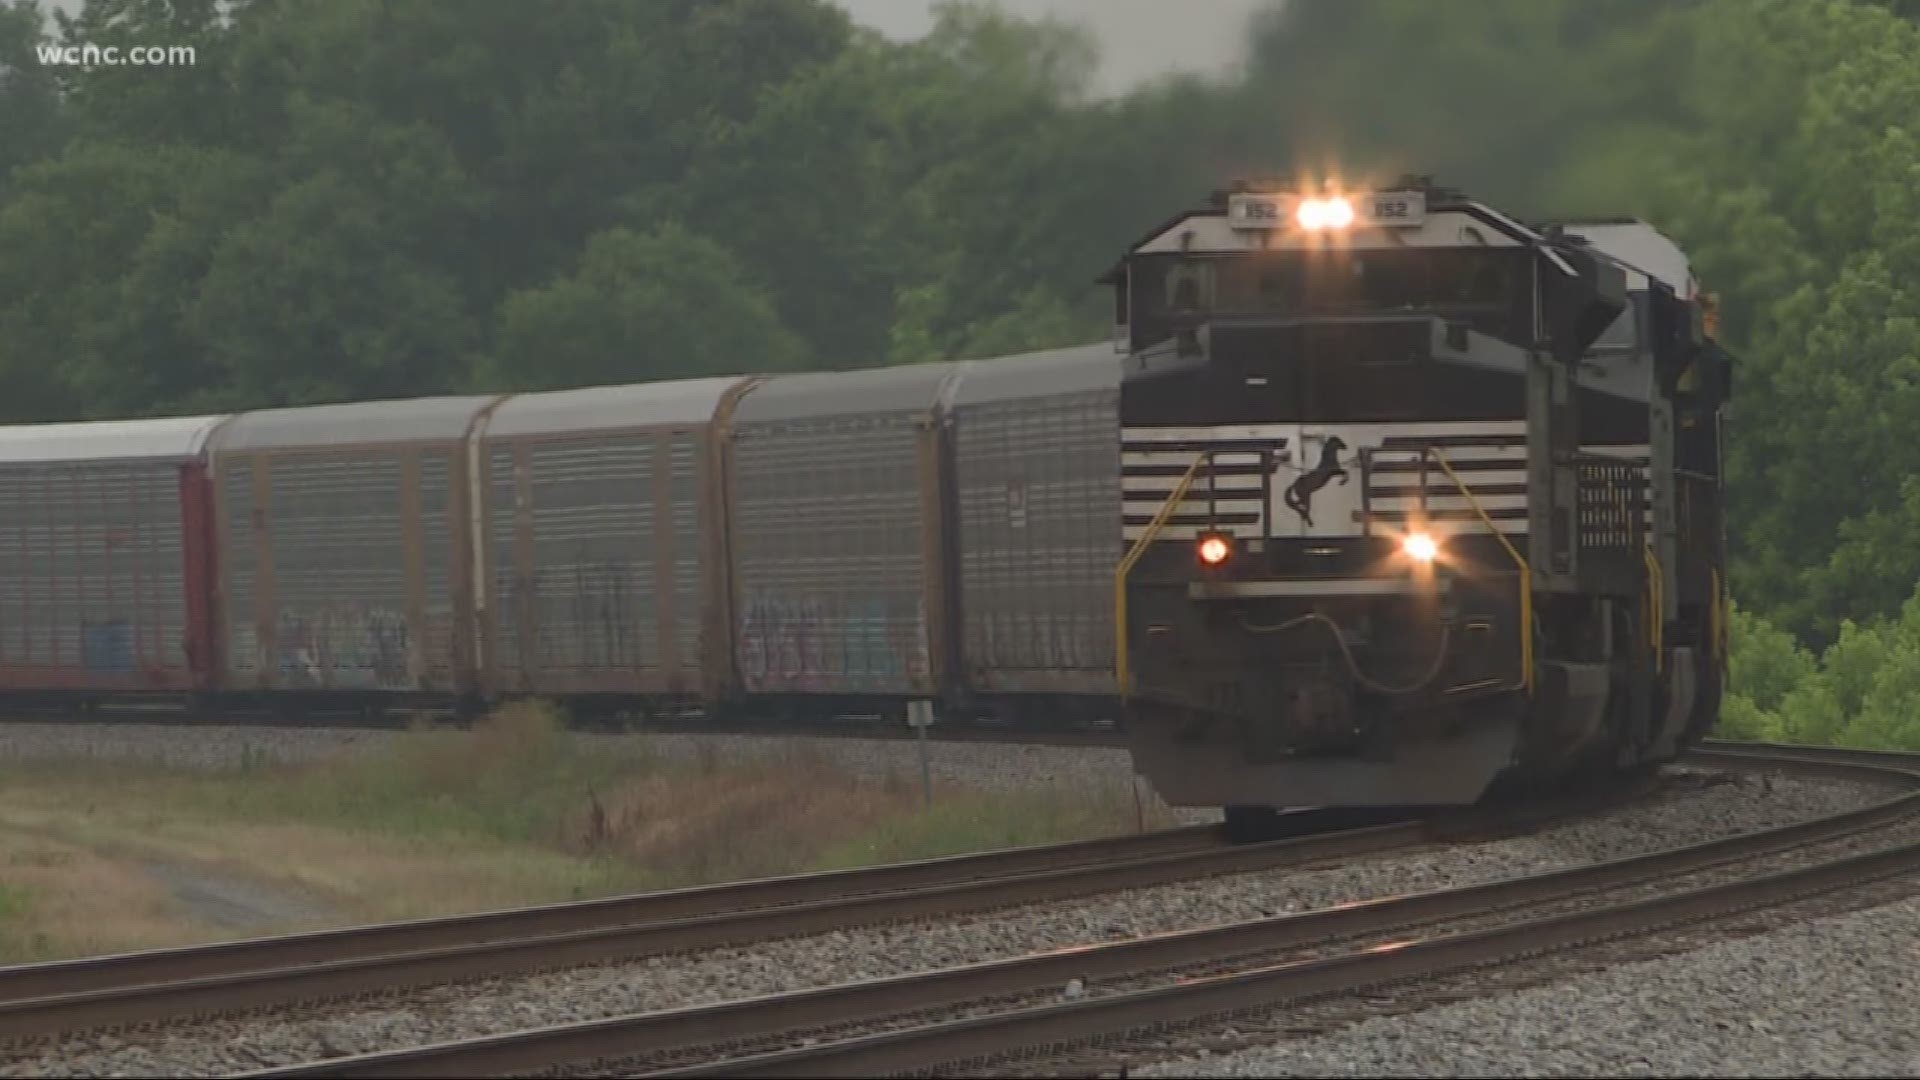 Norfolk Southern operates in 22 states with 20,000 miles of tracks, but one of their biggest concerns is a 10-mile stretch going through Gastonia.